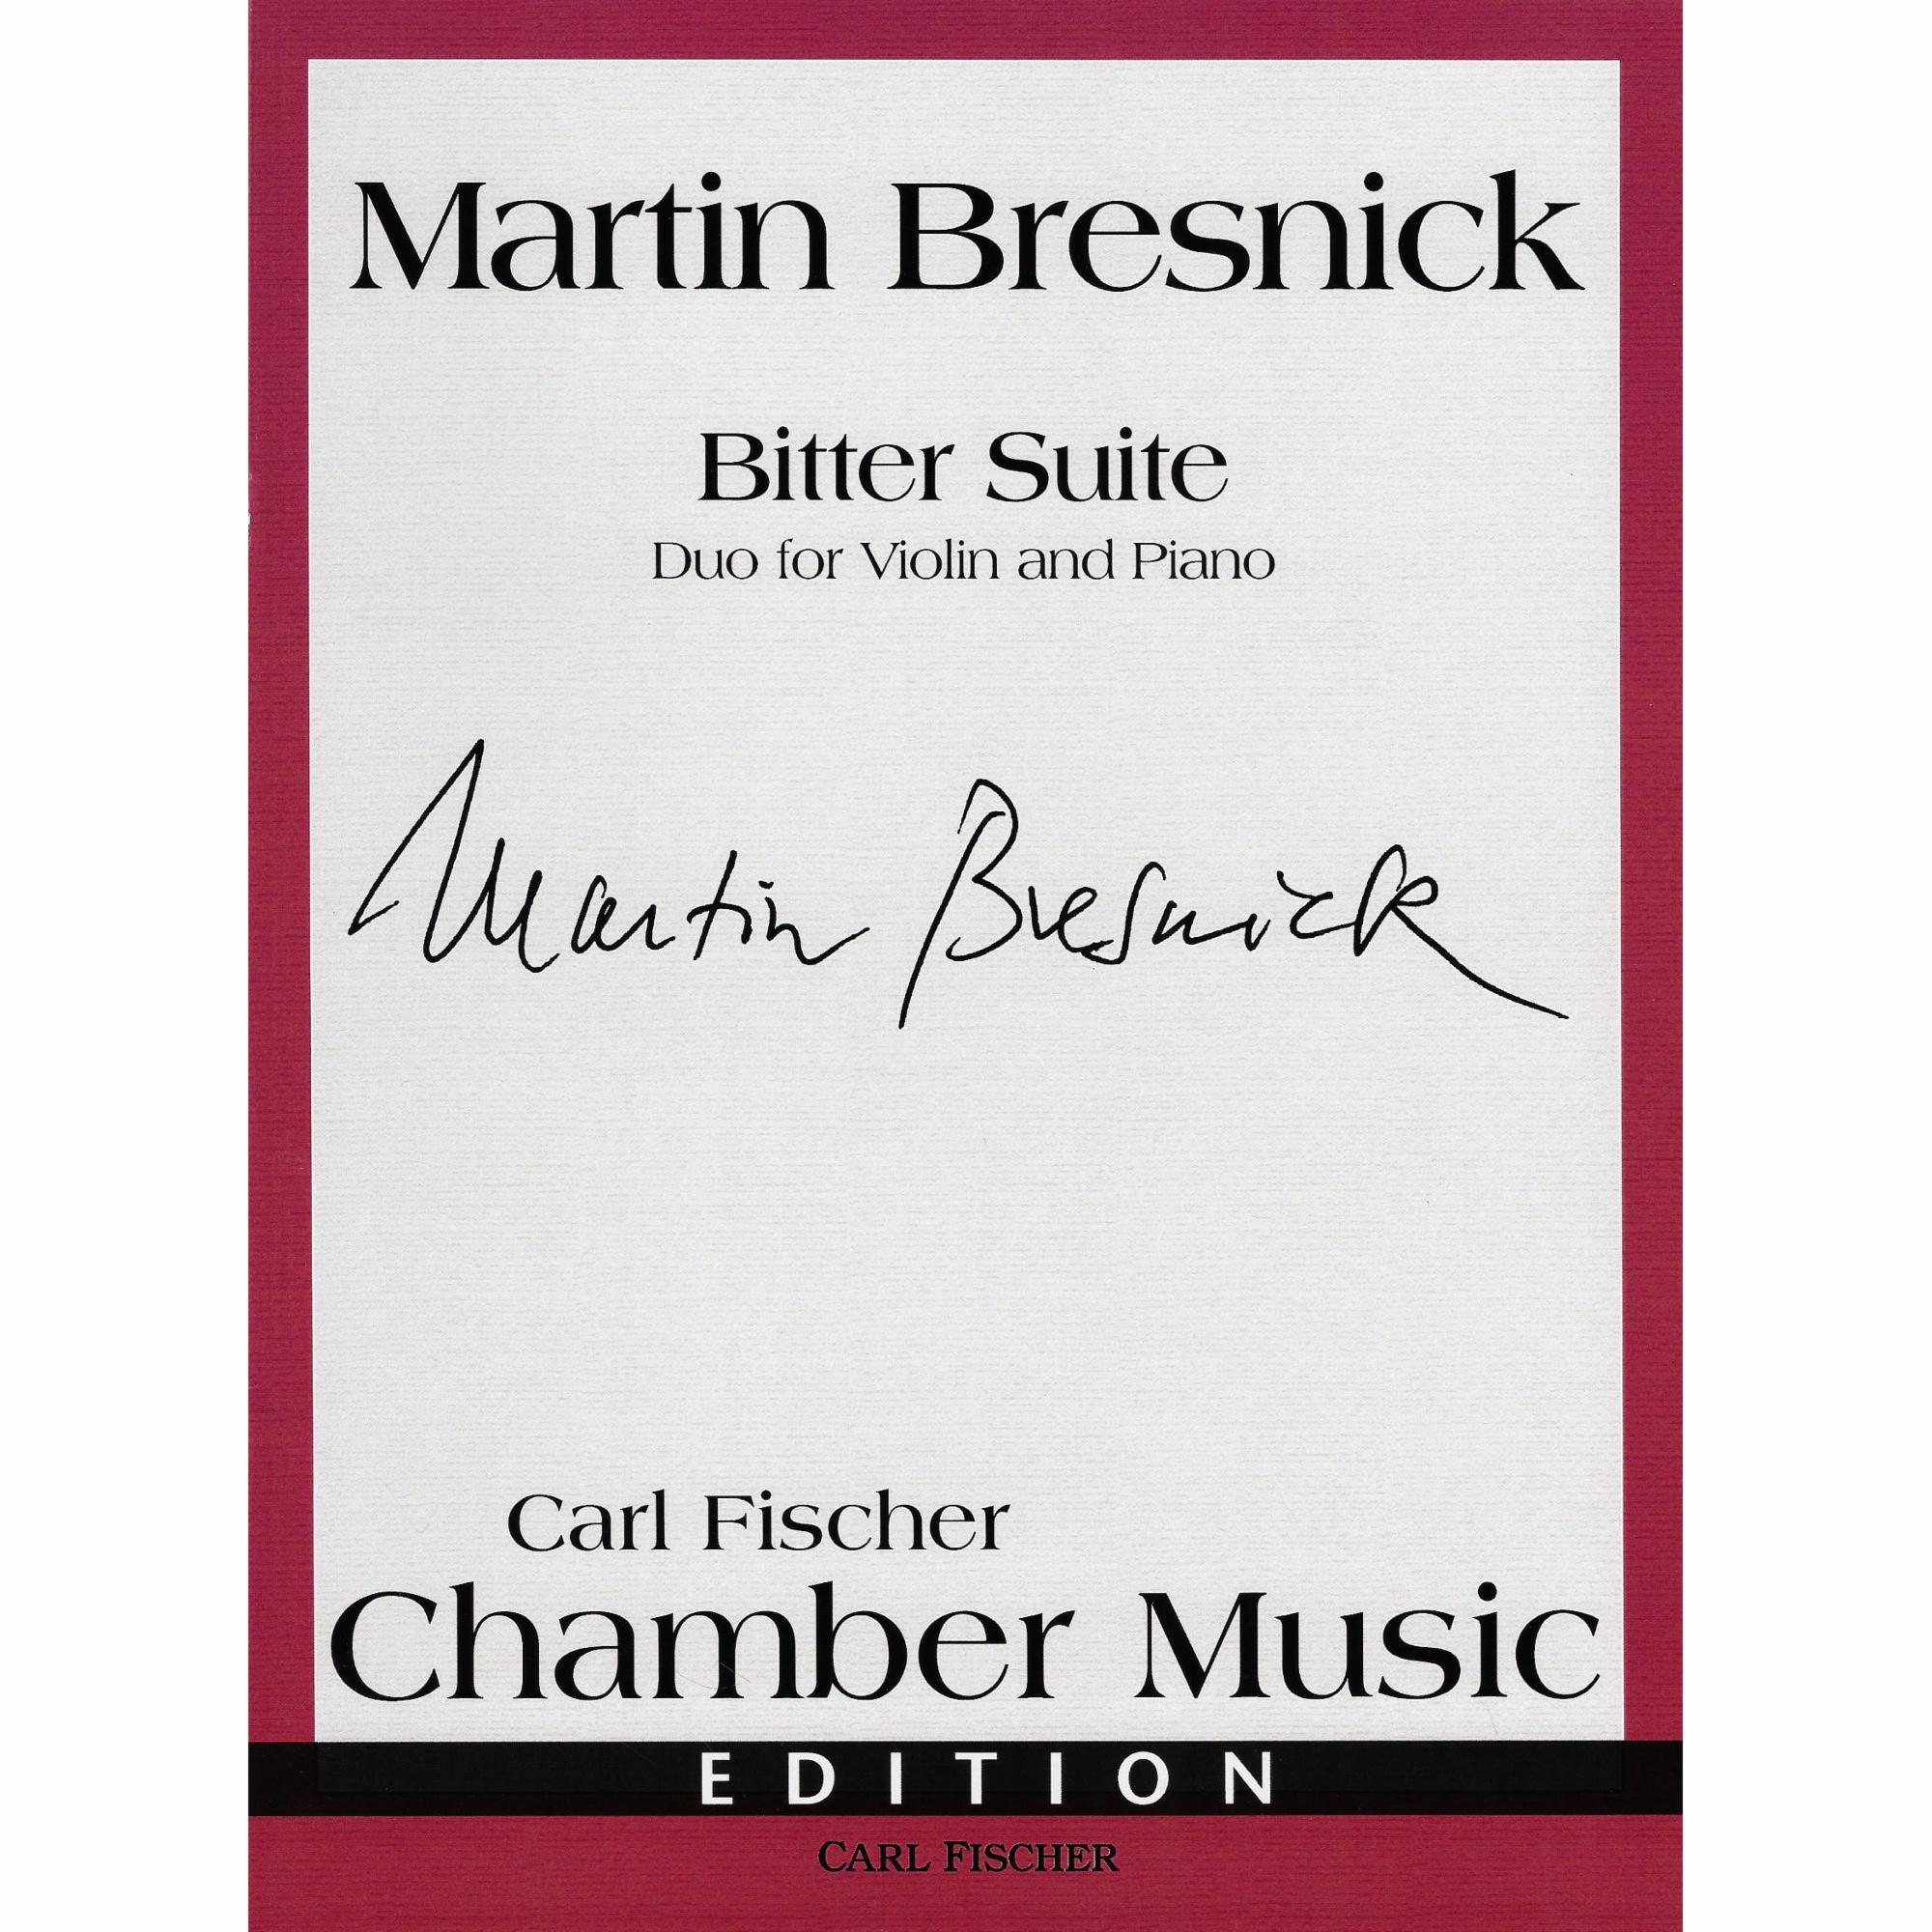 Bresnick -- Bitter Suite: Duo for Violin and Piano